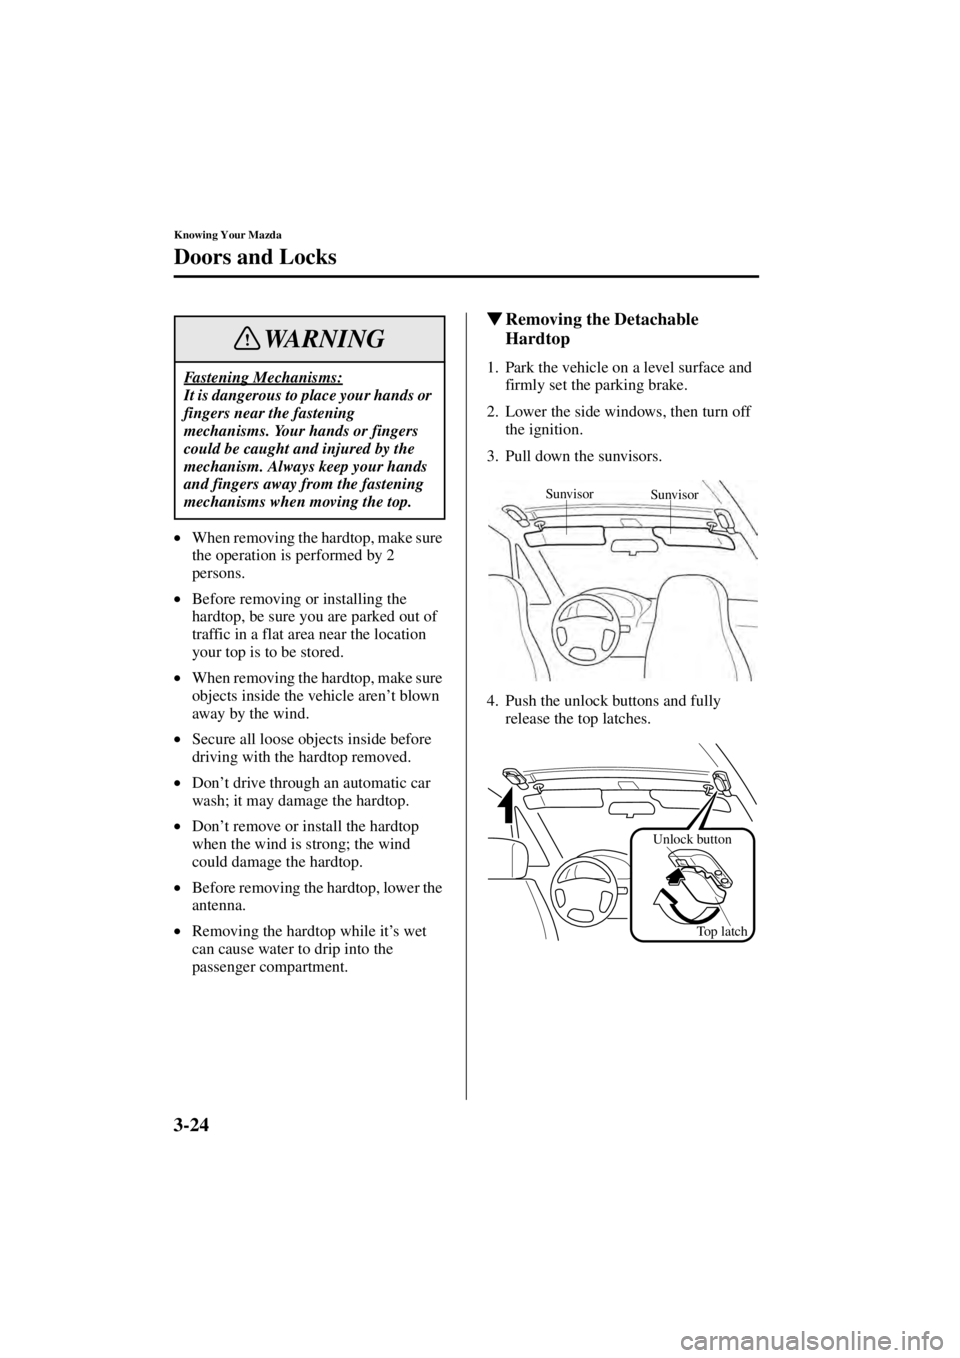 MAZDA MODEL SPEED MX-5 MIATA 2004  Owners Manual 3-24
Knowing Your Mazda
Doors and Locks
Form No. 8T02-EA-03L
•When removing the hardtop, make sure 
the operation is performed by 2 
persons.
• Before removing or installing the 
hardtop, be sure 